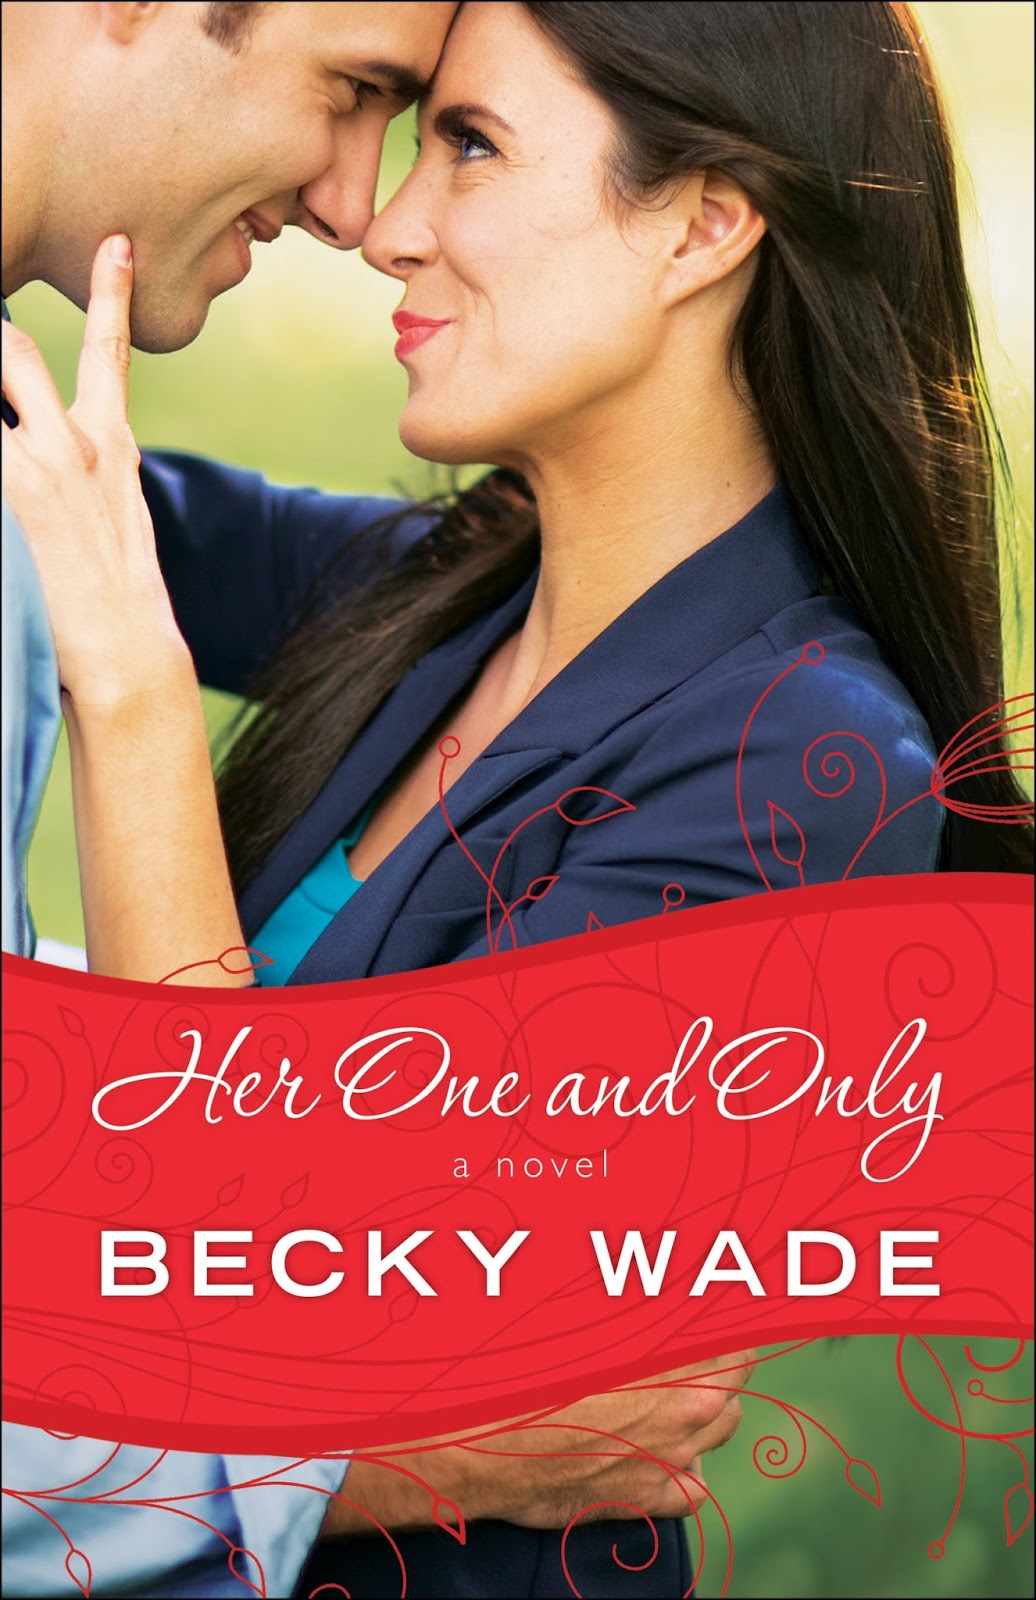 Her One and Only by Becky Wade